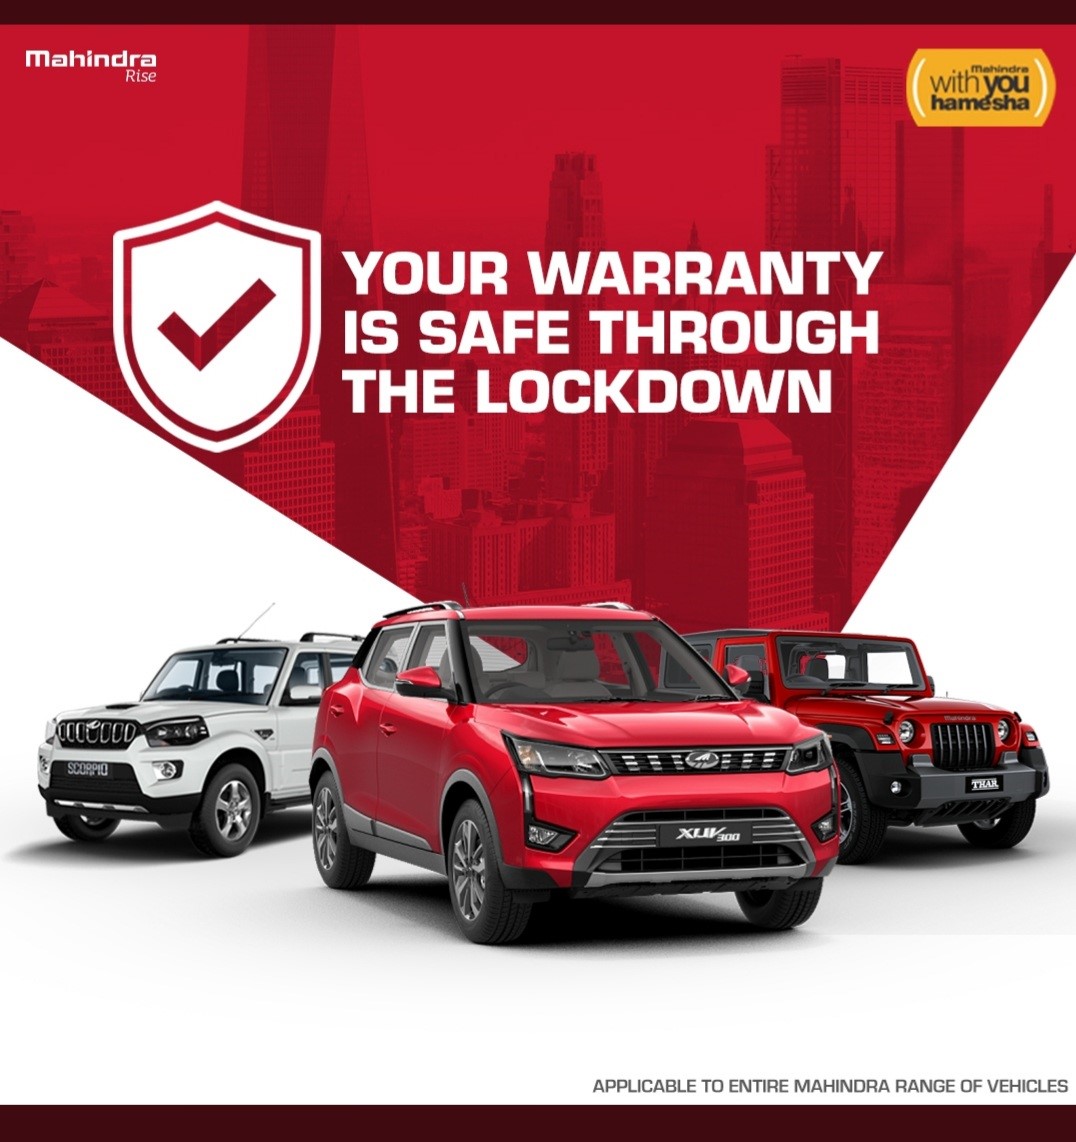 Mahindra extends warranty and free service period on its entire range of vehicles by 3 months decoding=